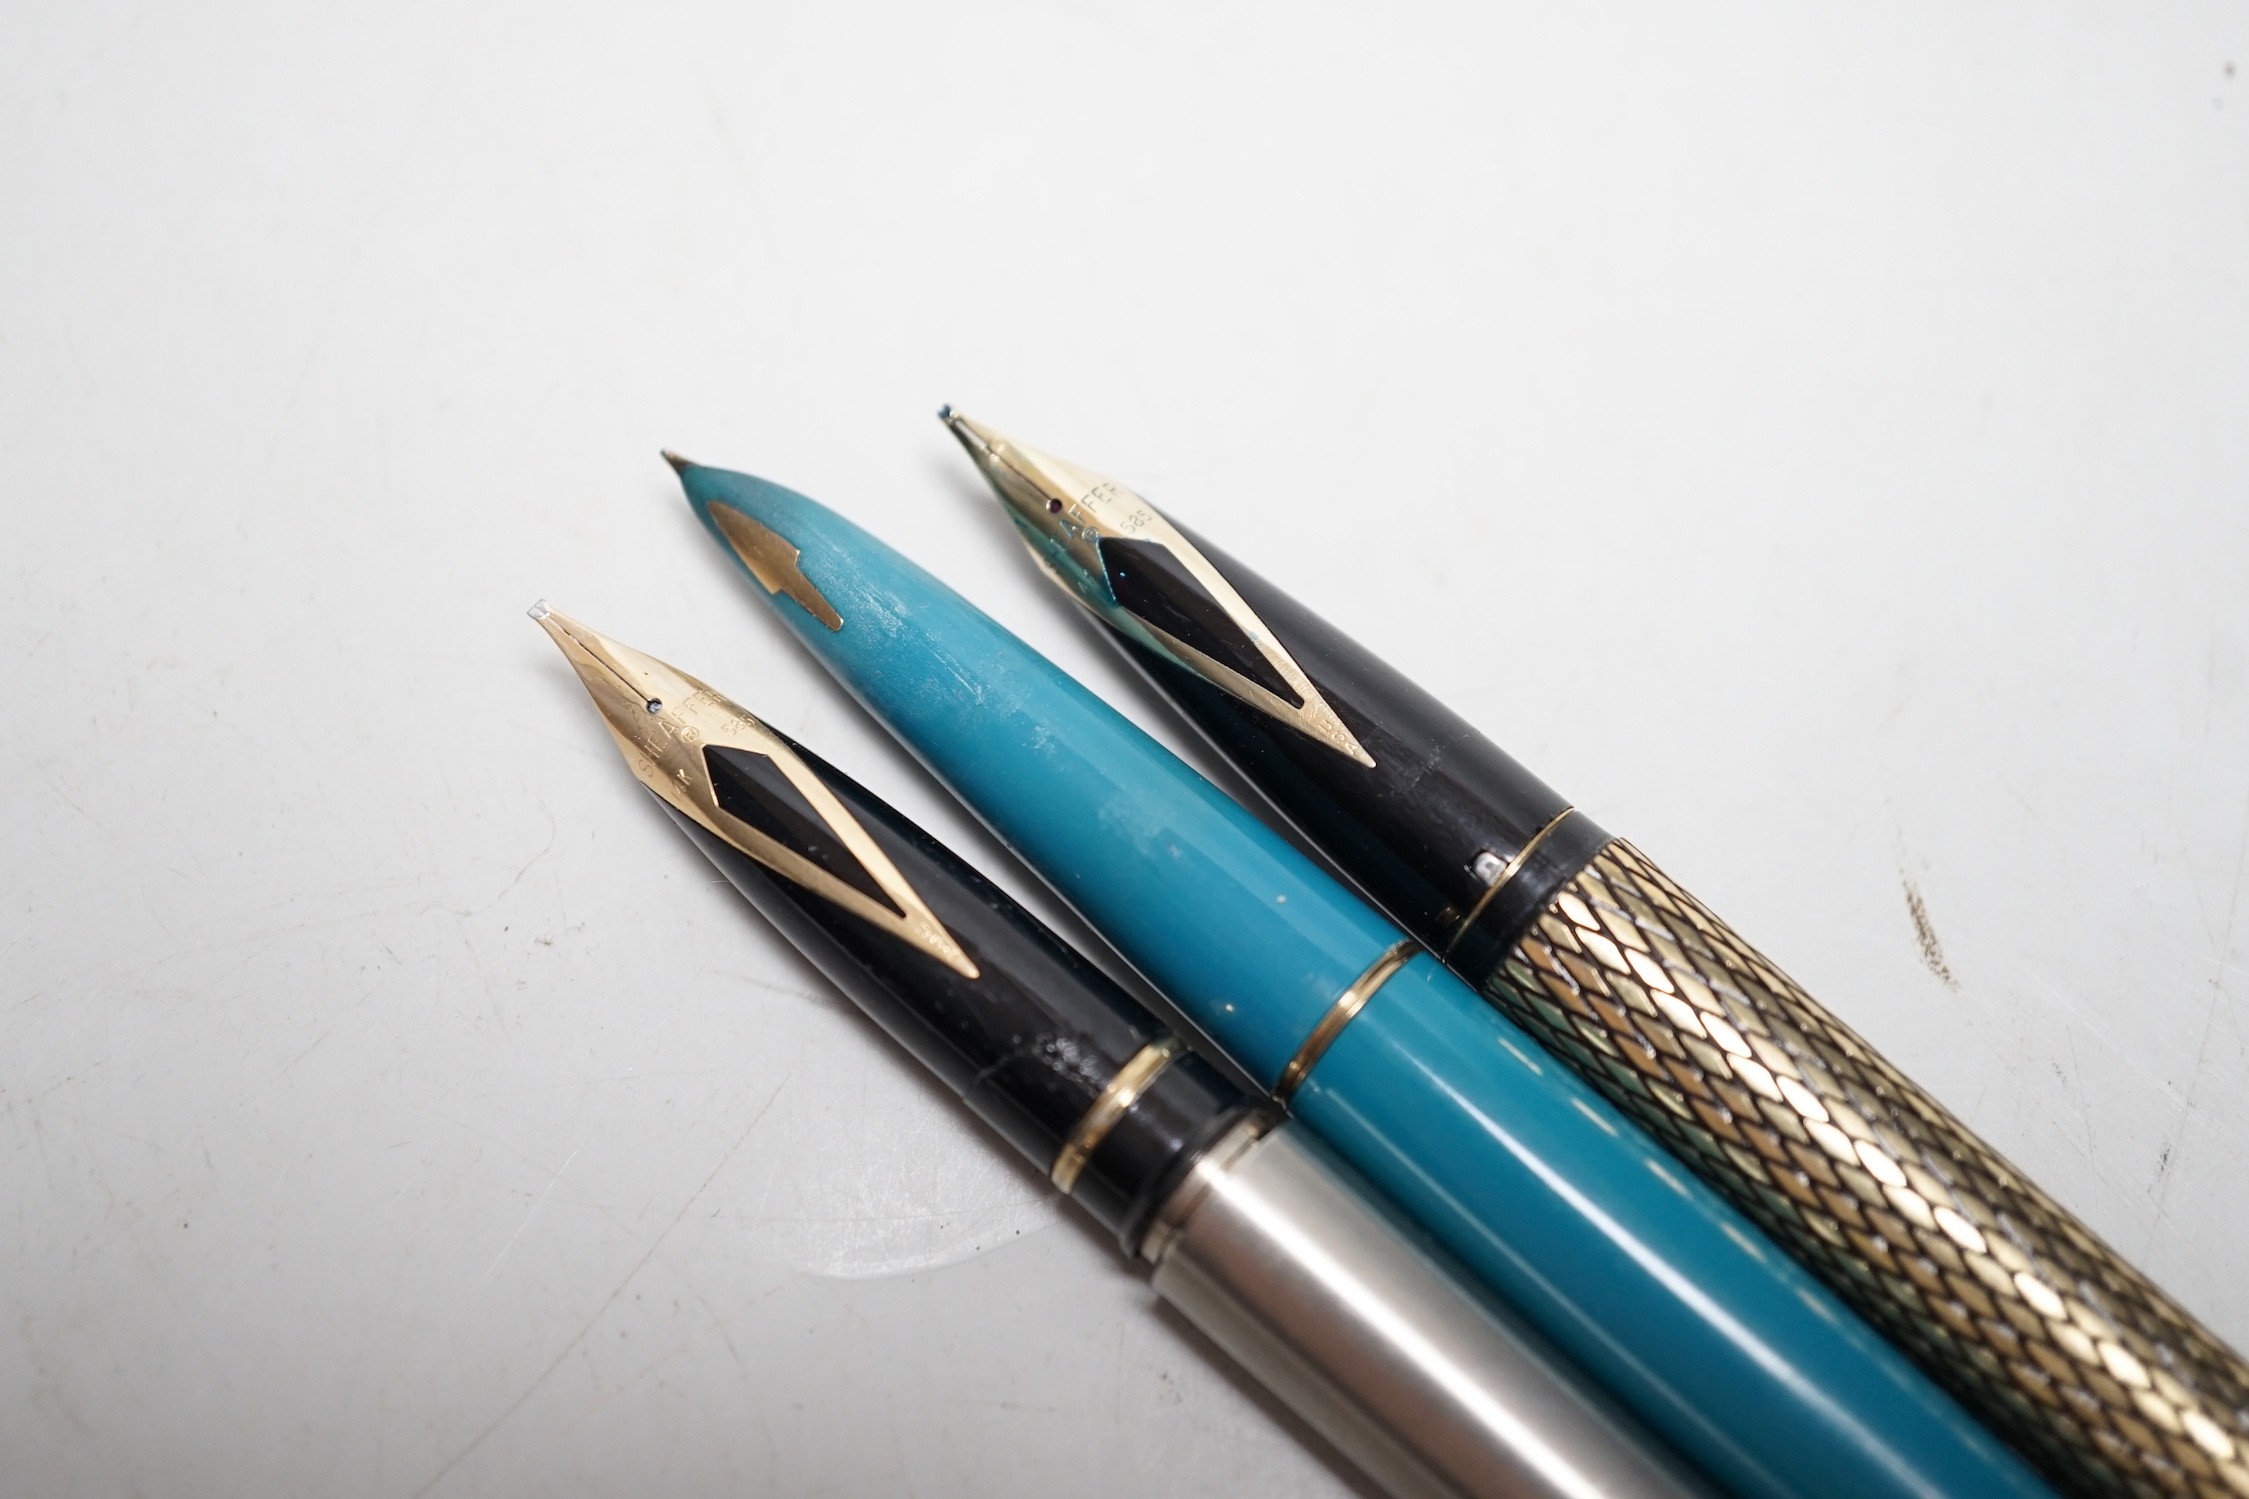 Fountain pens: Two Sheaffer and one Parker